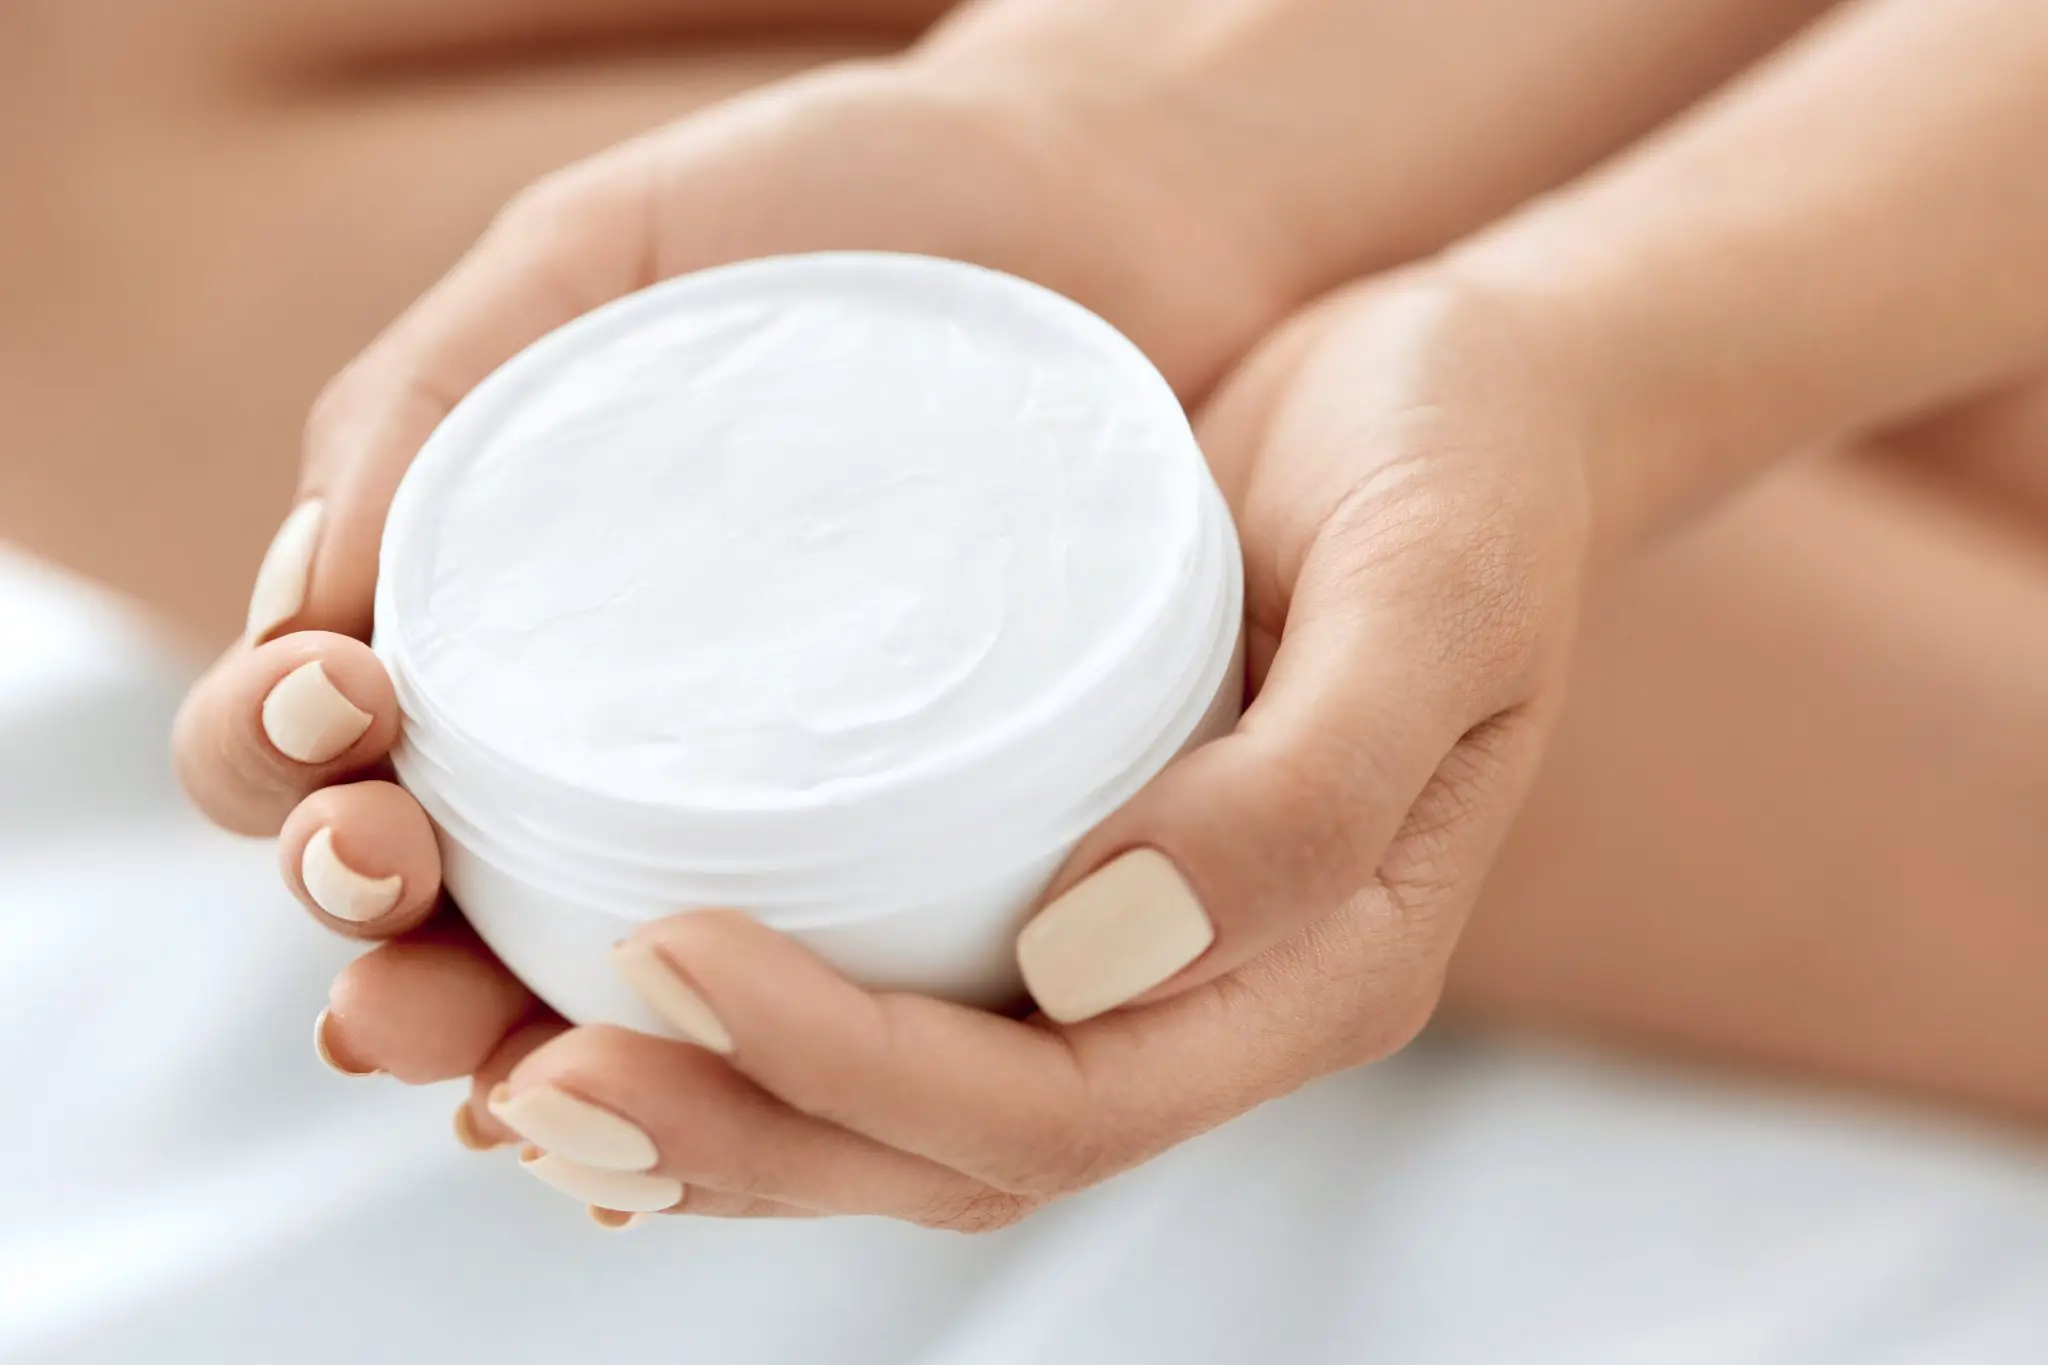 Difference between body butters, creams and lotions